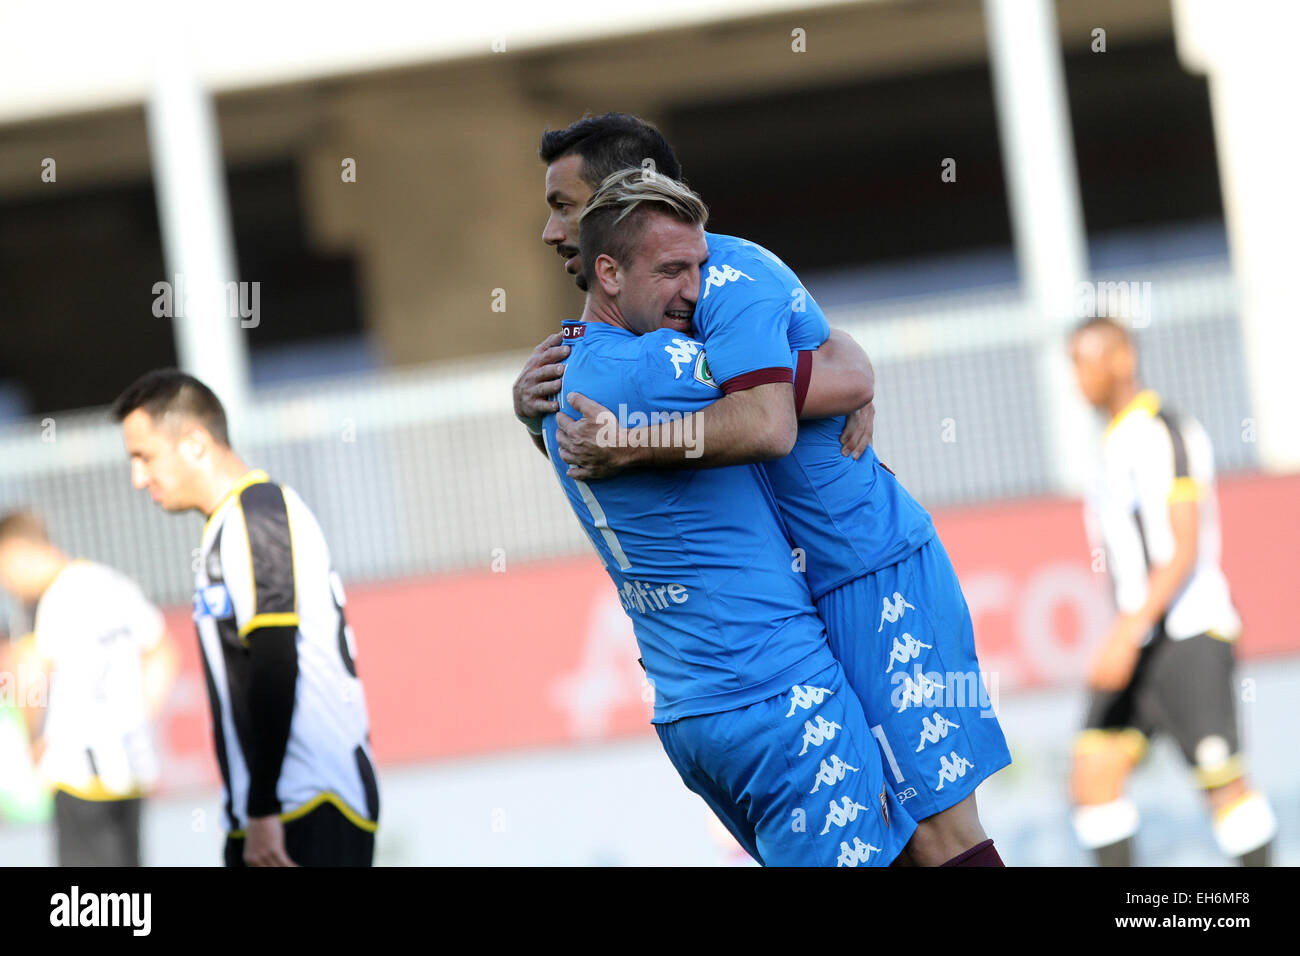 Udine, Italy. 8th March, 2015. Torino's forward Quagliarella Fabio (R) celebrates after scored goal 1 - 1 with Torino's forward Maxi Lopez during the Italian Serie A football match between Udinese and Torino on Sunday 08 March 2015 at Friuli Stadium. Credit:  Andrea Spinelli/Alamy Live News Stock Photo